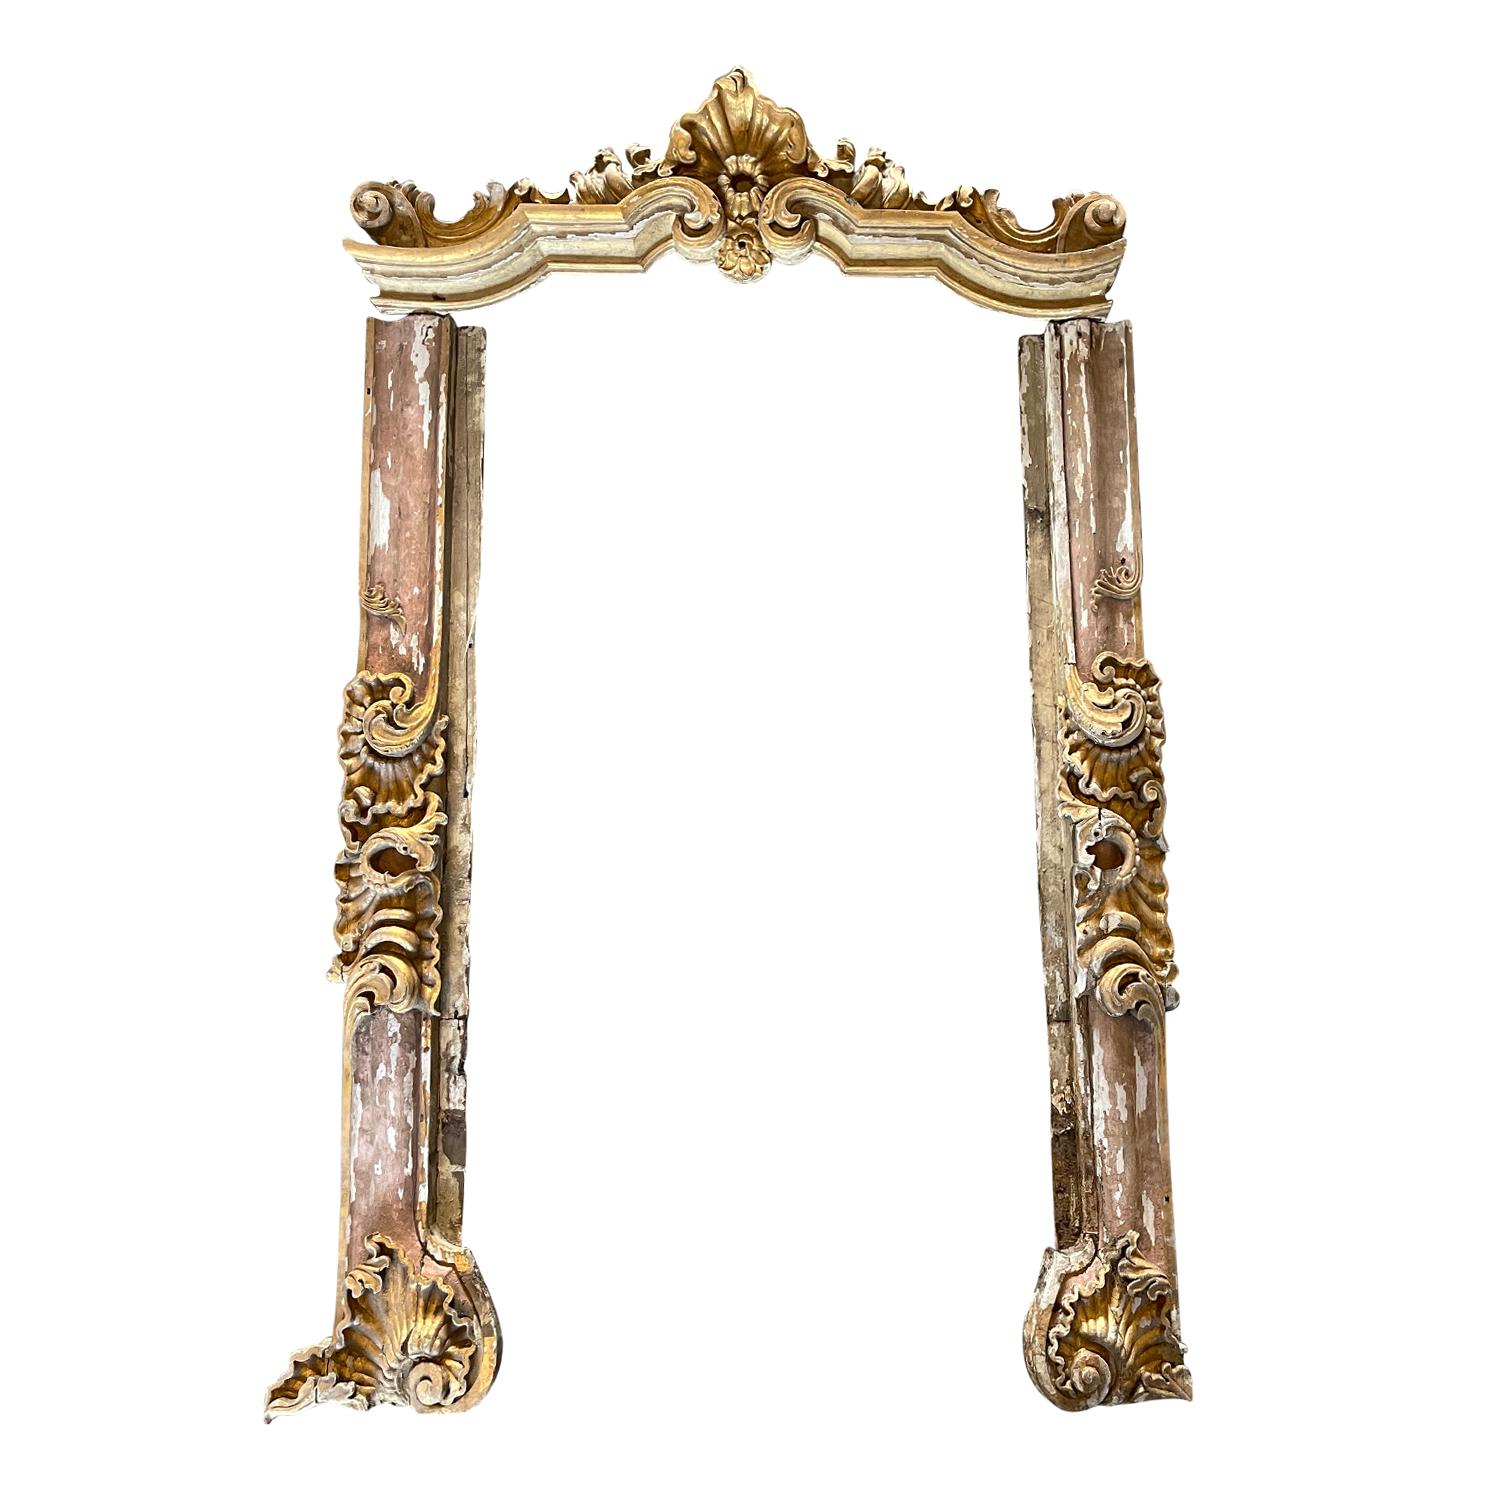 A Portuguese Baroque architectural wall frame with intricate scroll details, original painted patina, in good condition. Wear consistent with age and use. Circa 17th - 18th Century, Portugal. 

Interior: 85